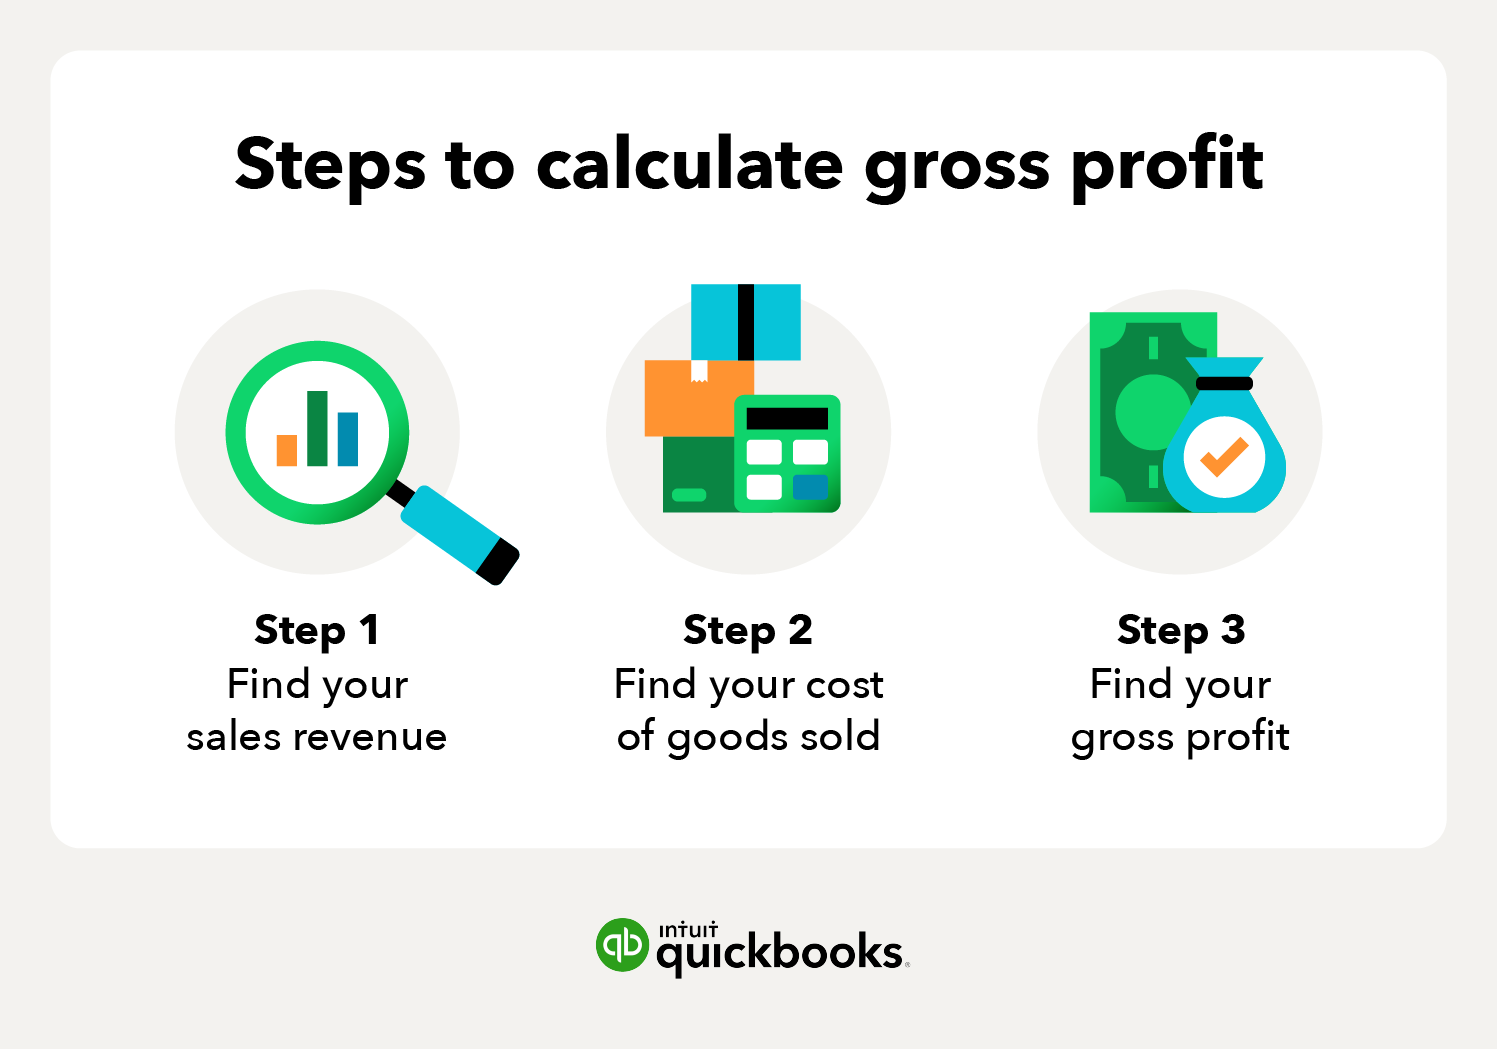 Steps to calculate gross profit 1. Find your sales revenue 2. Find your cost of goods sold 3. Find your gross profit